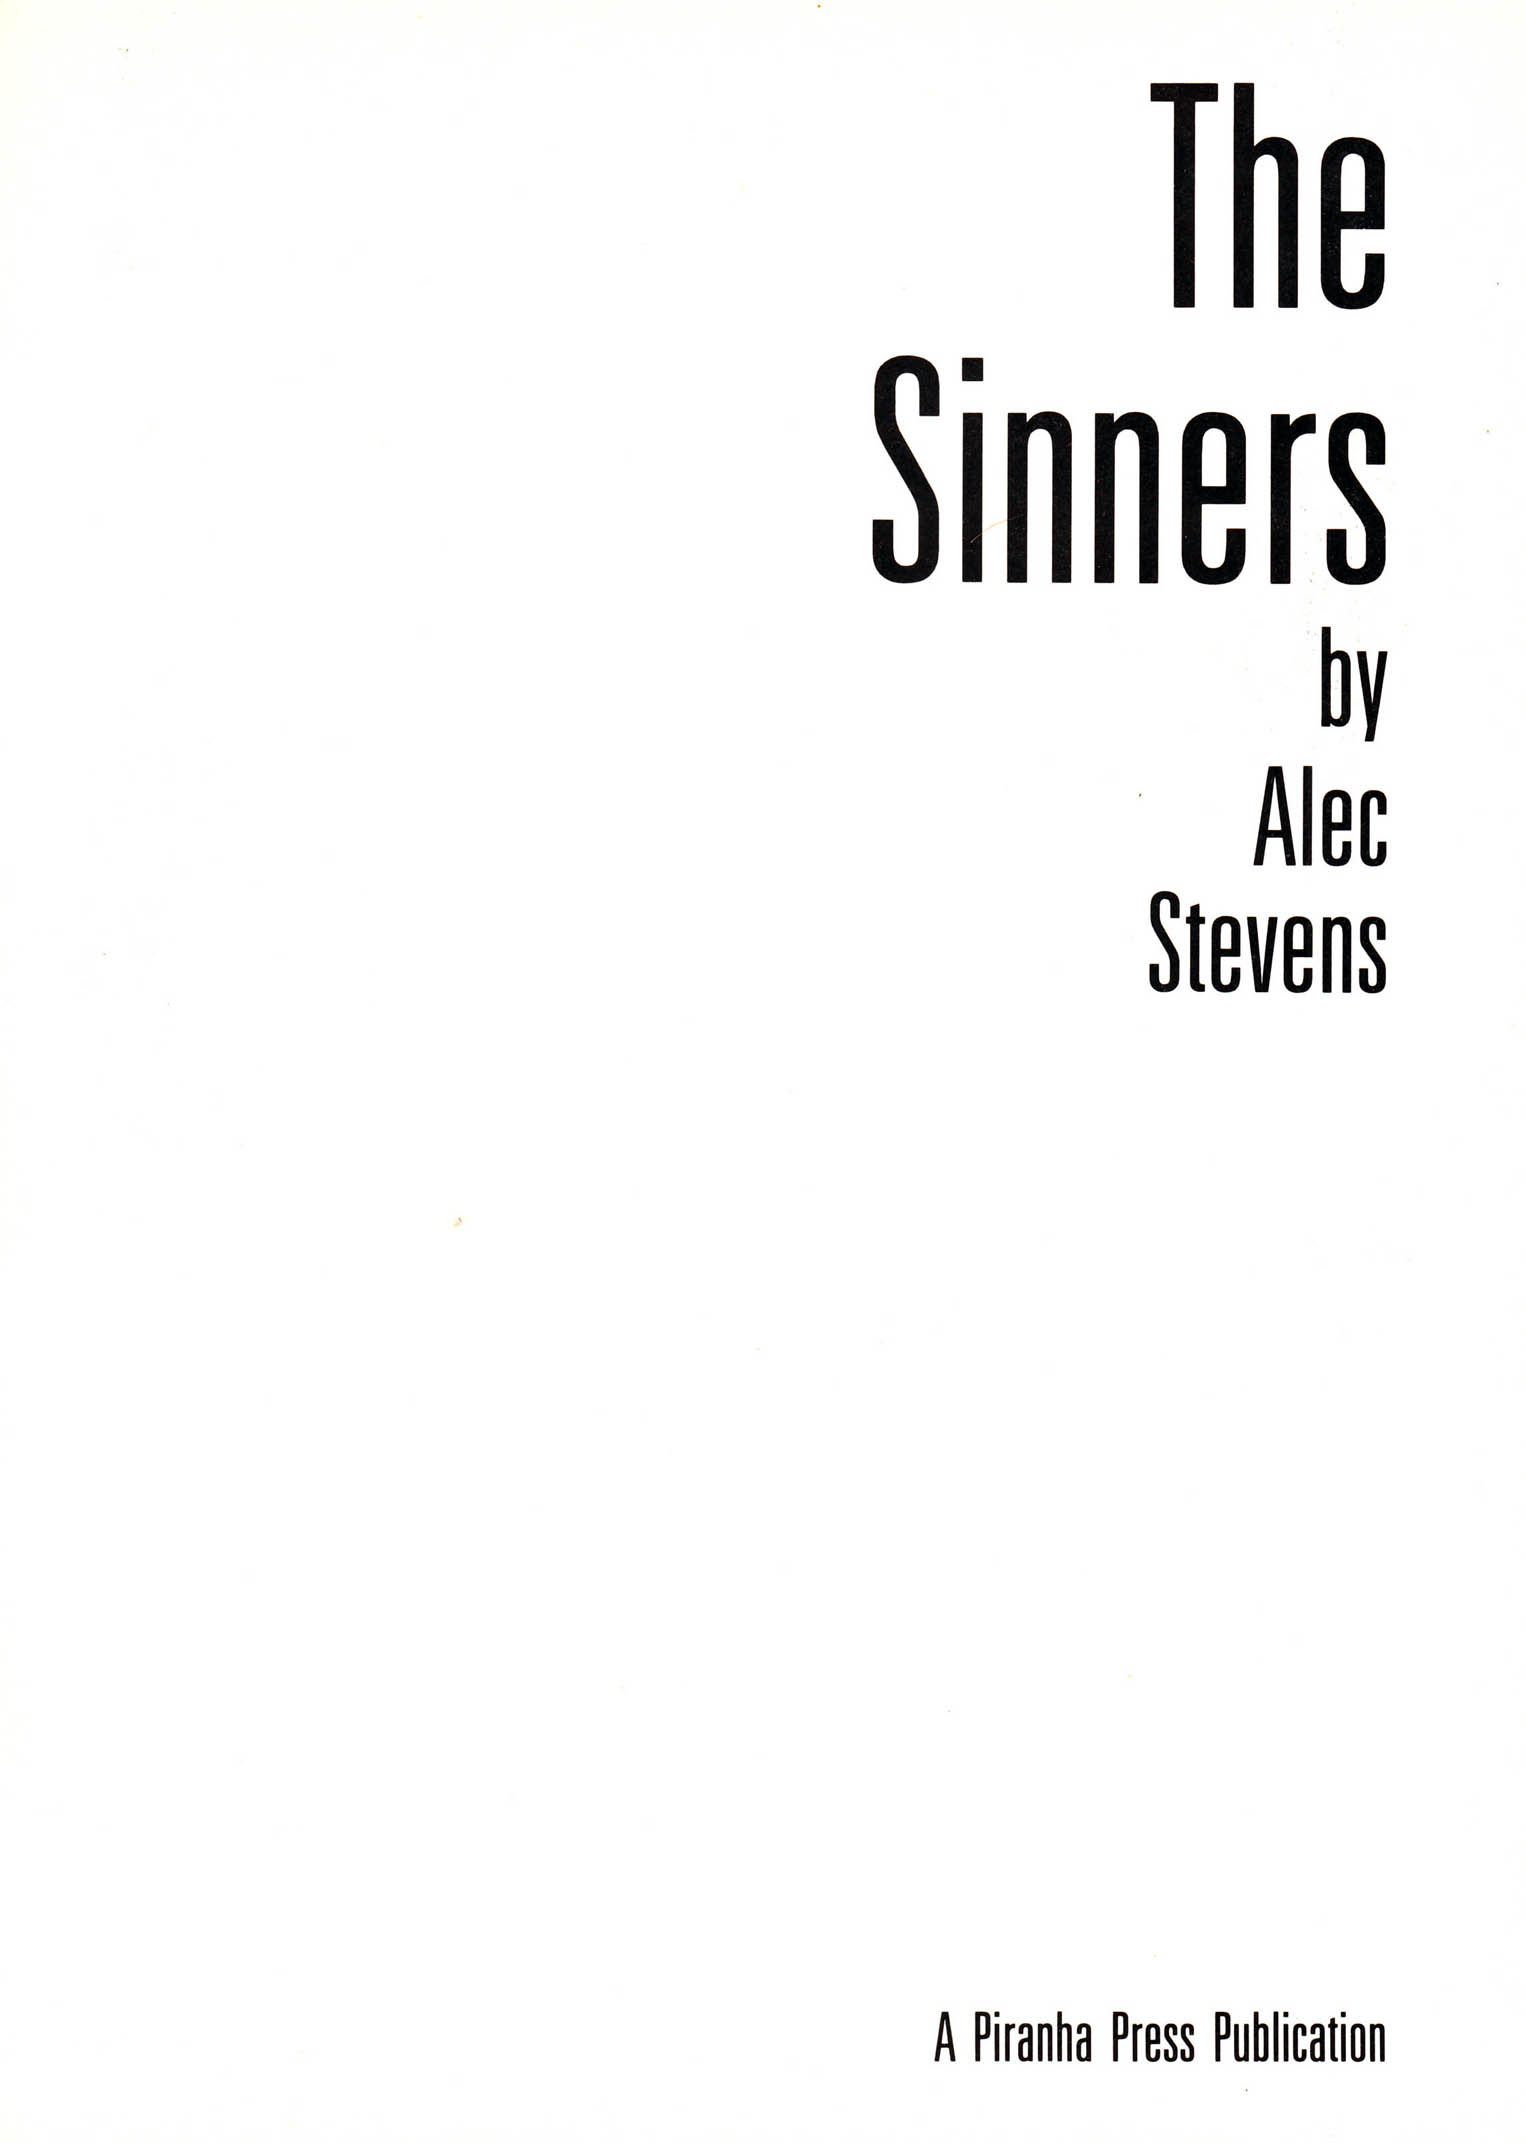 Read online The Sinners comic -  Issue # Full - 5